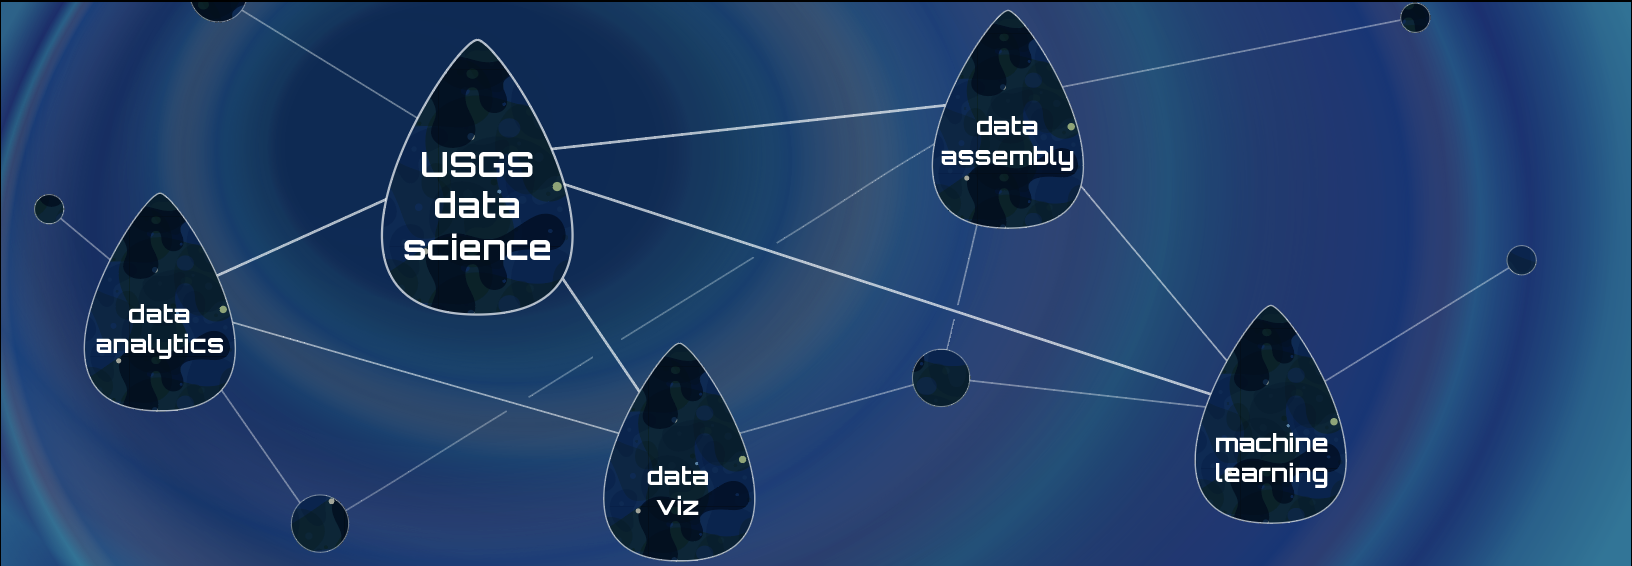 An abstract network diagram that has eleven nodes, five with text. The largest node says _USGS data science_, and the other four smaller text nodes list the four main capabilities of the USGS water data science branch: _data viz_, _machine learning_, _data analytics_, and _data assembly_. Background is blue with feel good vibes.